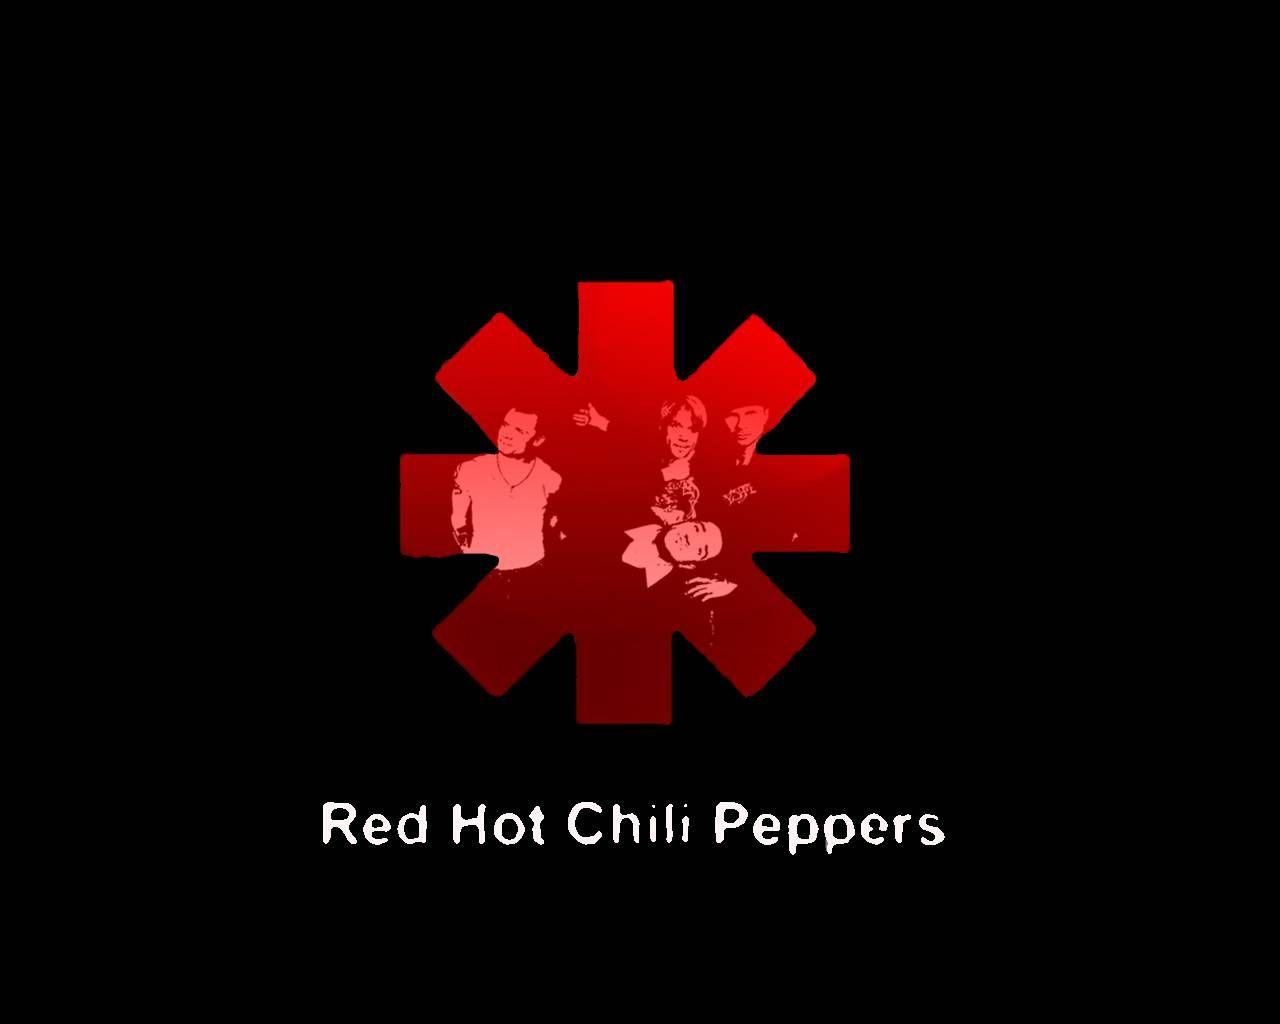 Music red hot chili peppers wallpaper - Quality